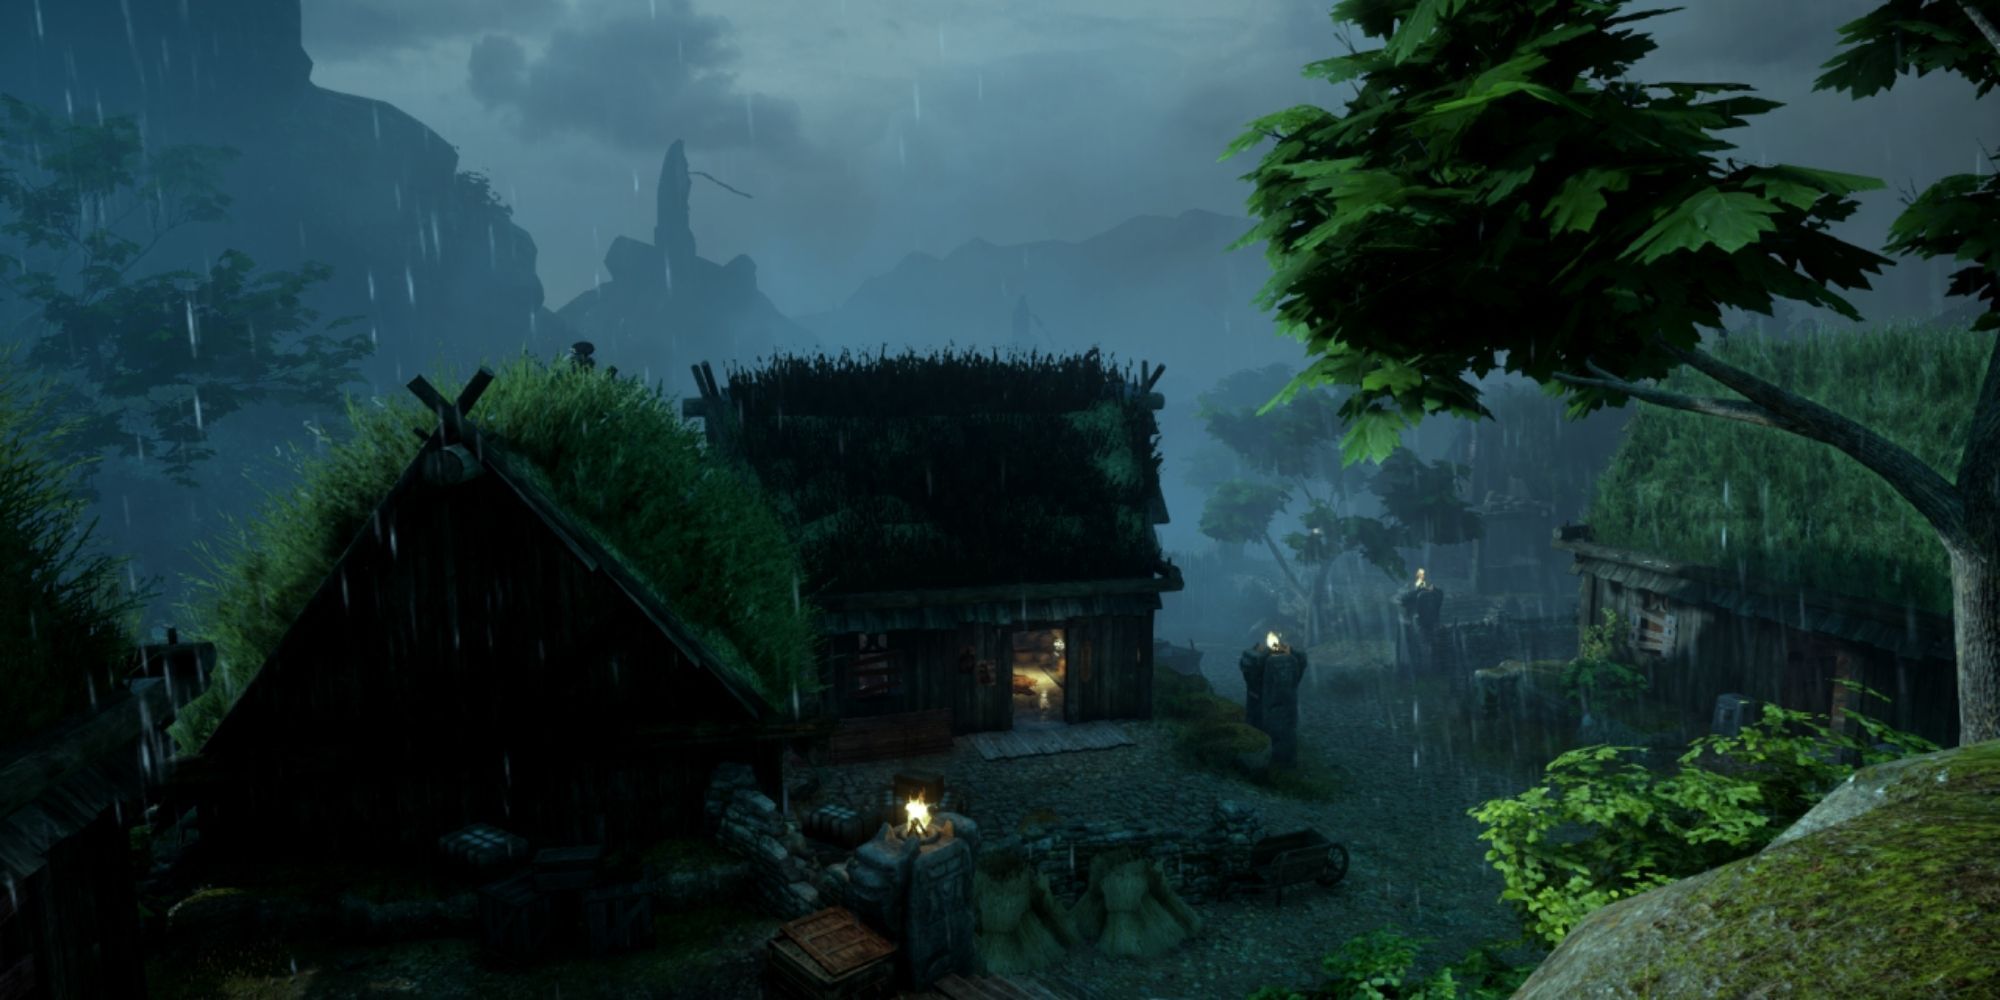 Dragon Age Inquisition - The Village of Crestwood at night